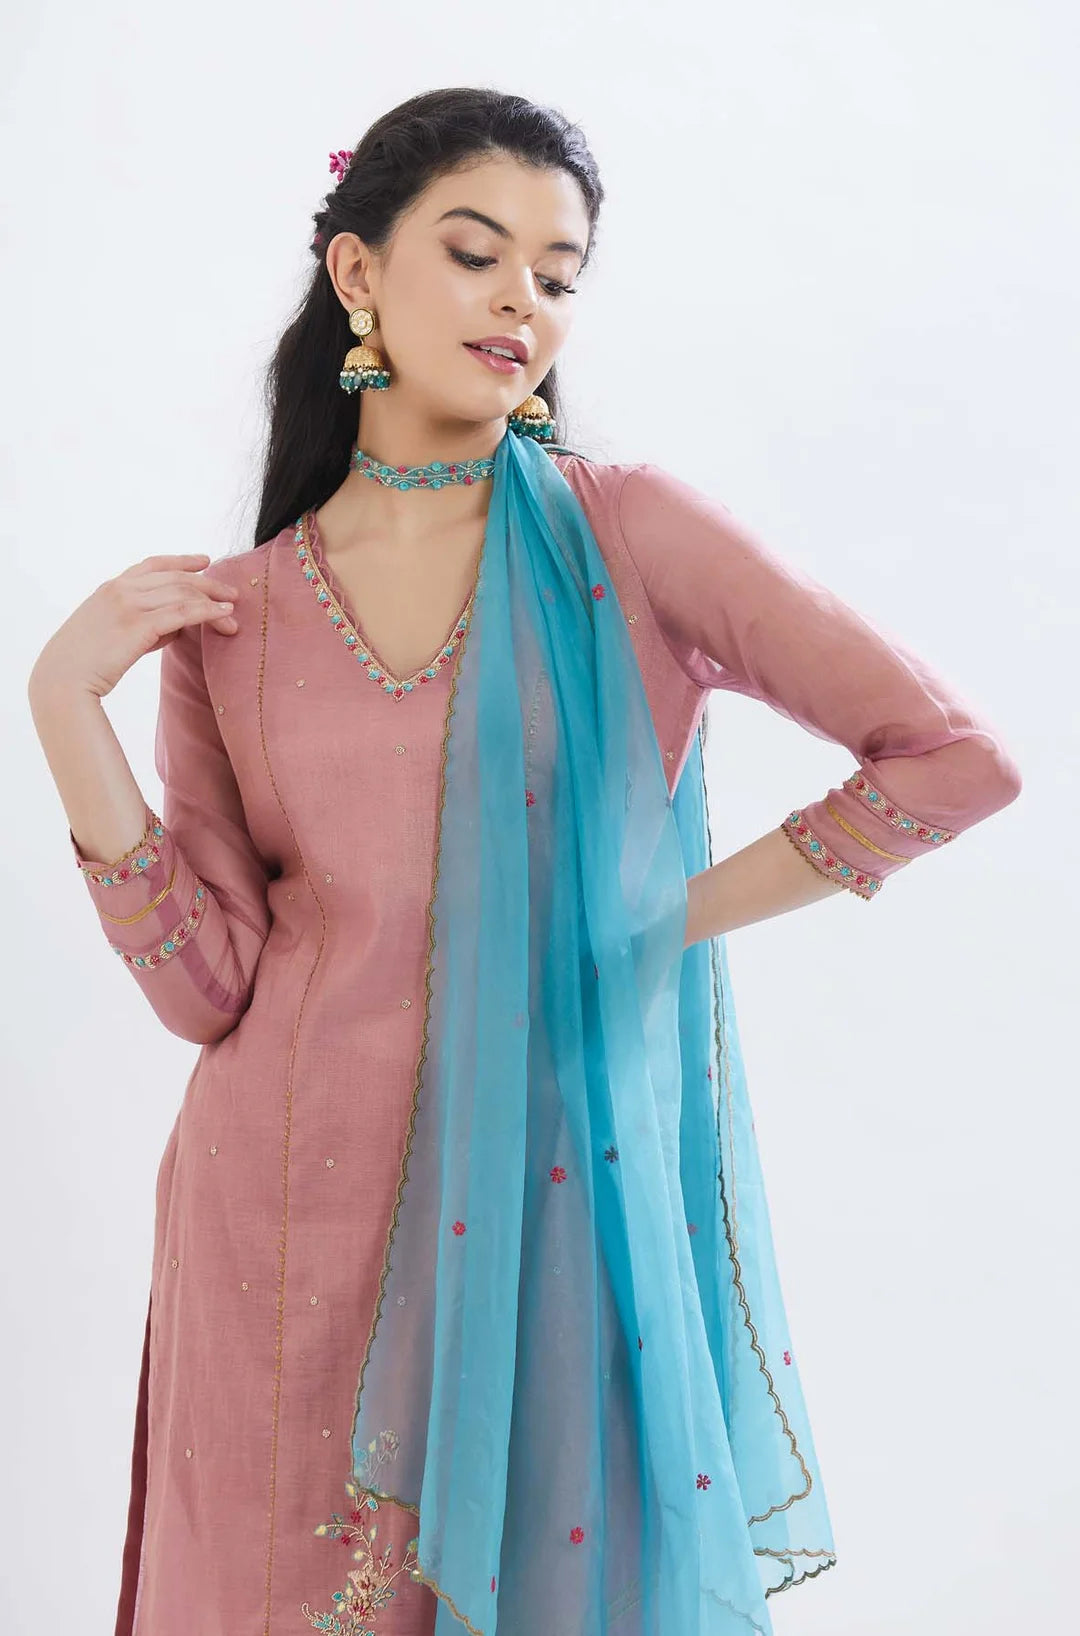 Old Rose Embroidered Kurta Set - Indian Clothing in Denver, CO, Aurora, CO, Boulder, CO, Fort Collins, CO, Colorado Springs, CO, Parker, CO, Highlands Ranch, CO, Cherry Creek, CO, Centennial, CO, and Longmont, CO. Nationwide shipping USA - India Fashion X